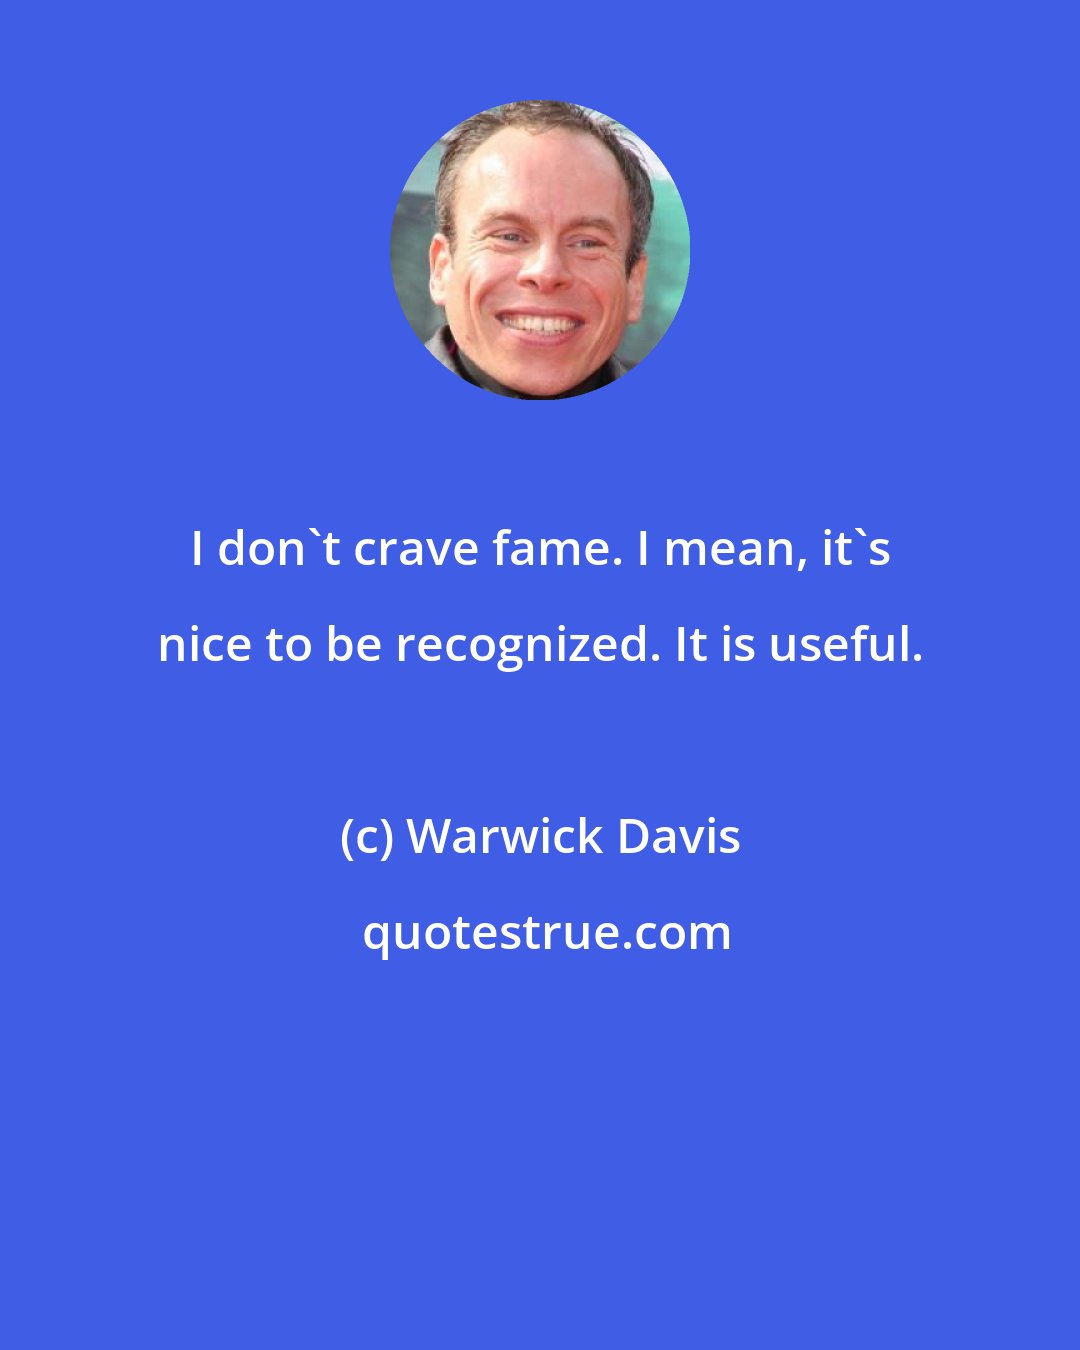 Warwick Davis: I don't crave fame. I mean, it's nice to be recognized. It is useful.